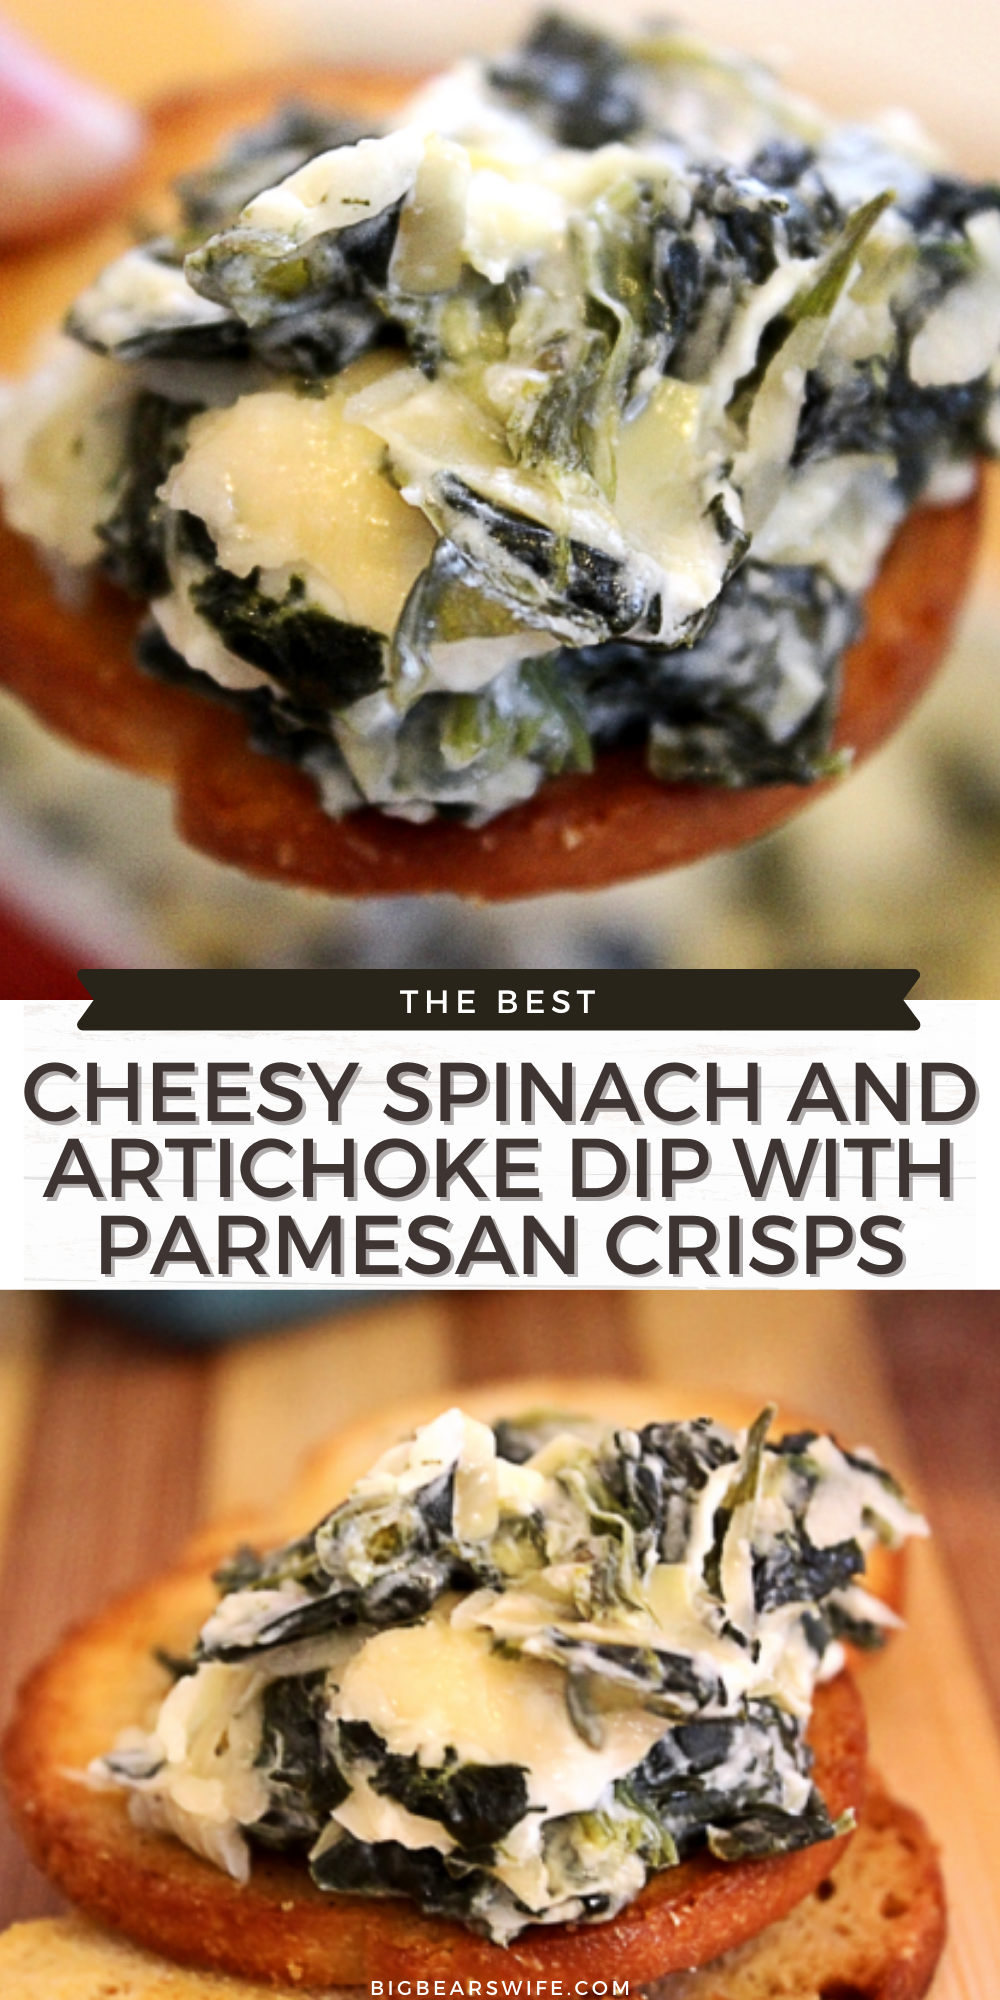 A super delicious Cheesy Spinach and Artichoke Dip with Parmesan Crisps that's perfect for parties and holidays! via @bigbearswife